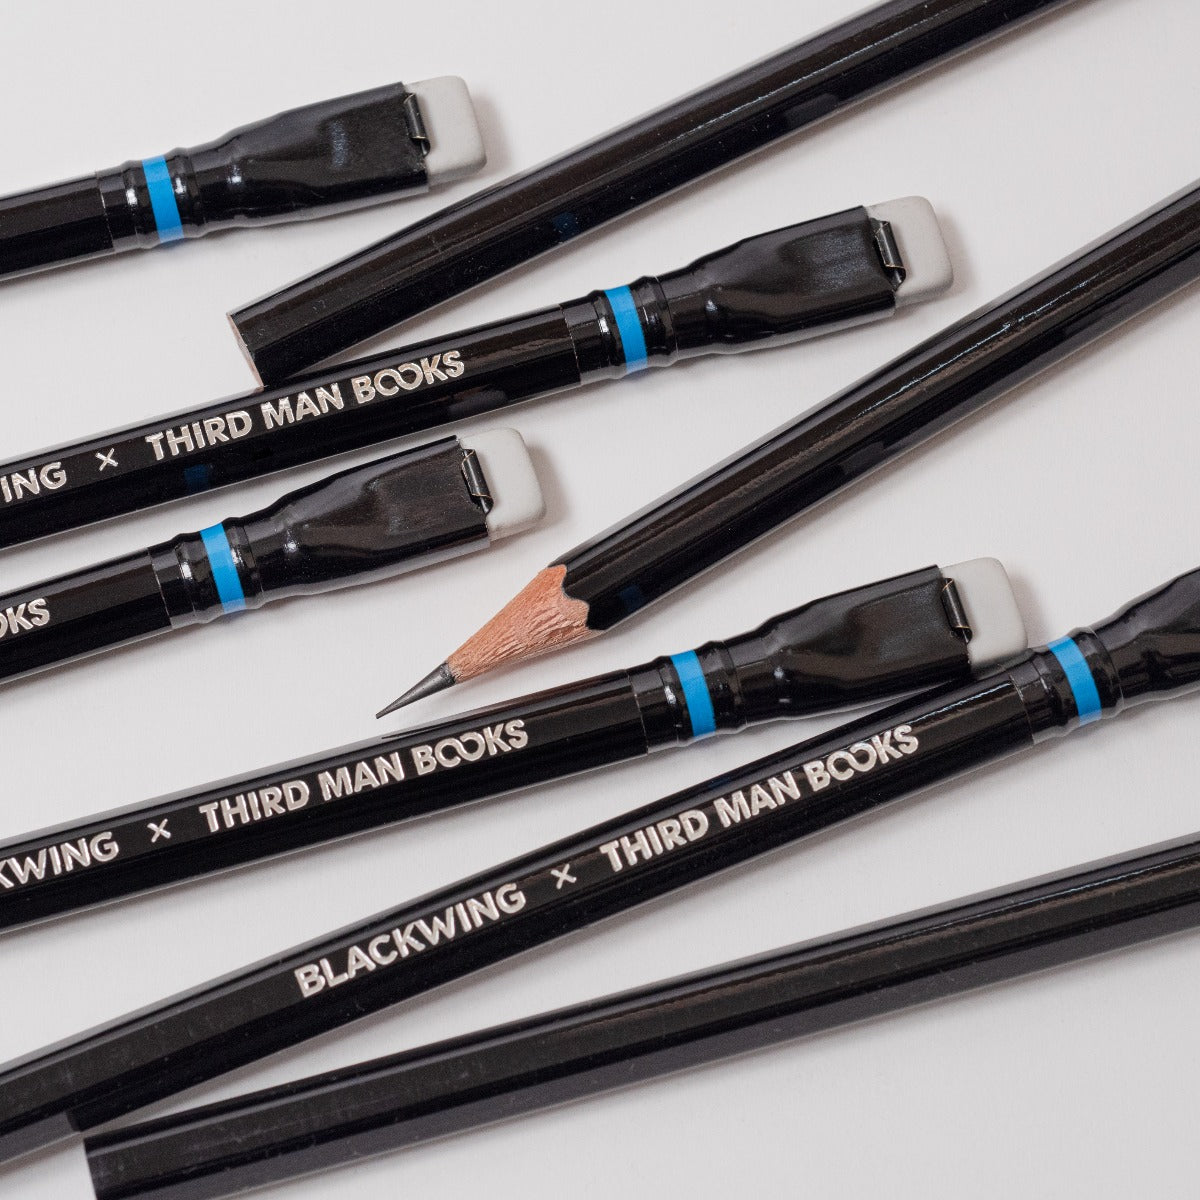 On Banjo Blackwing Pencils – Compass Records